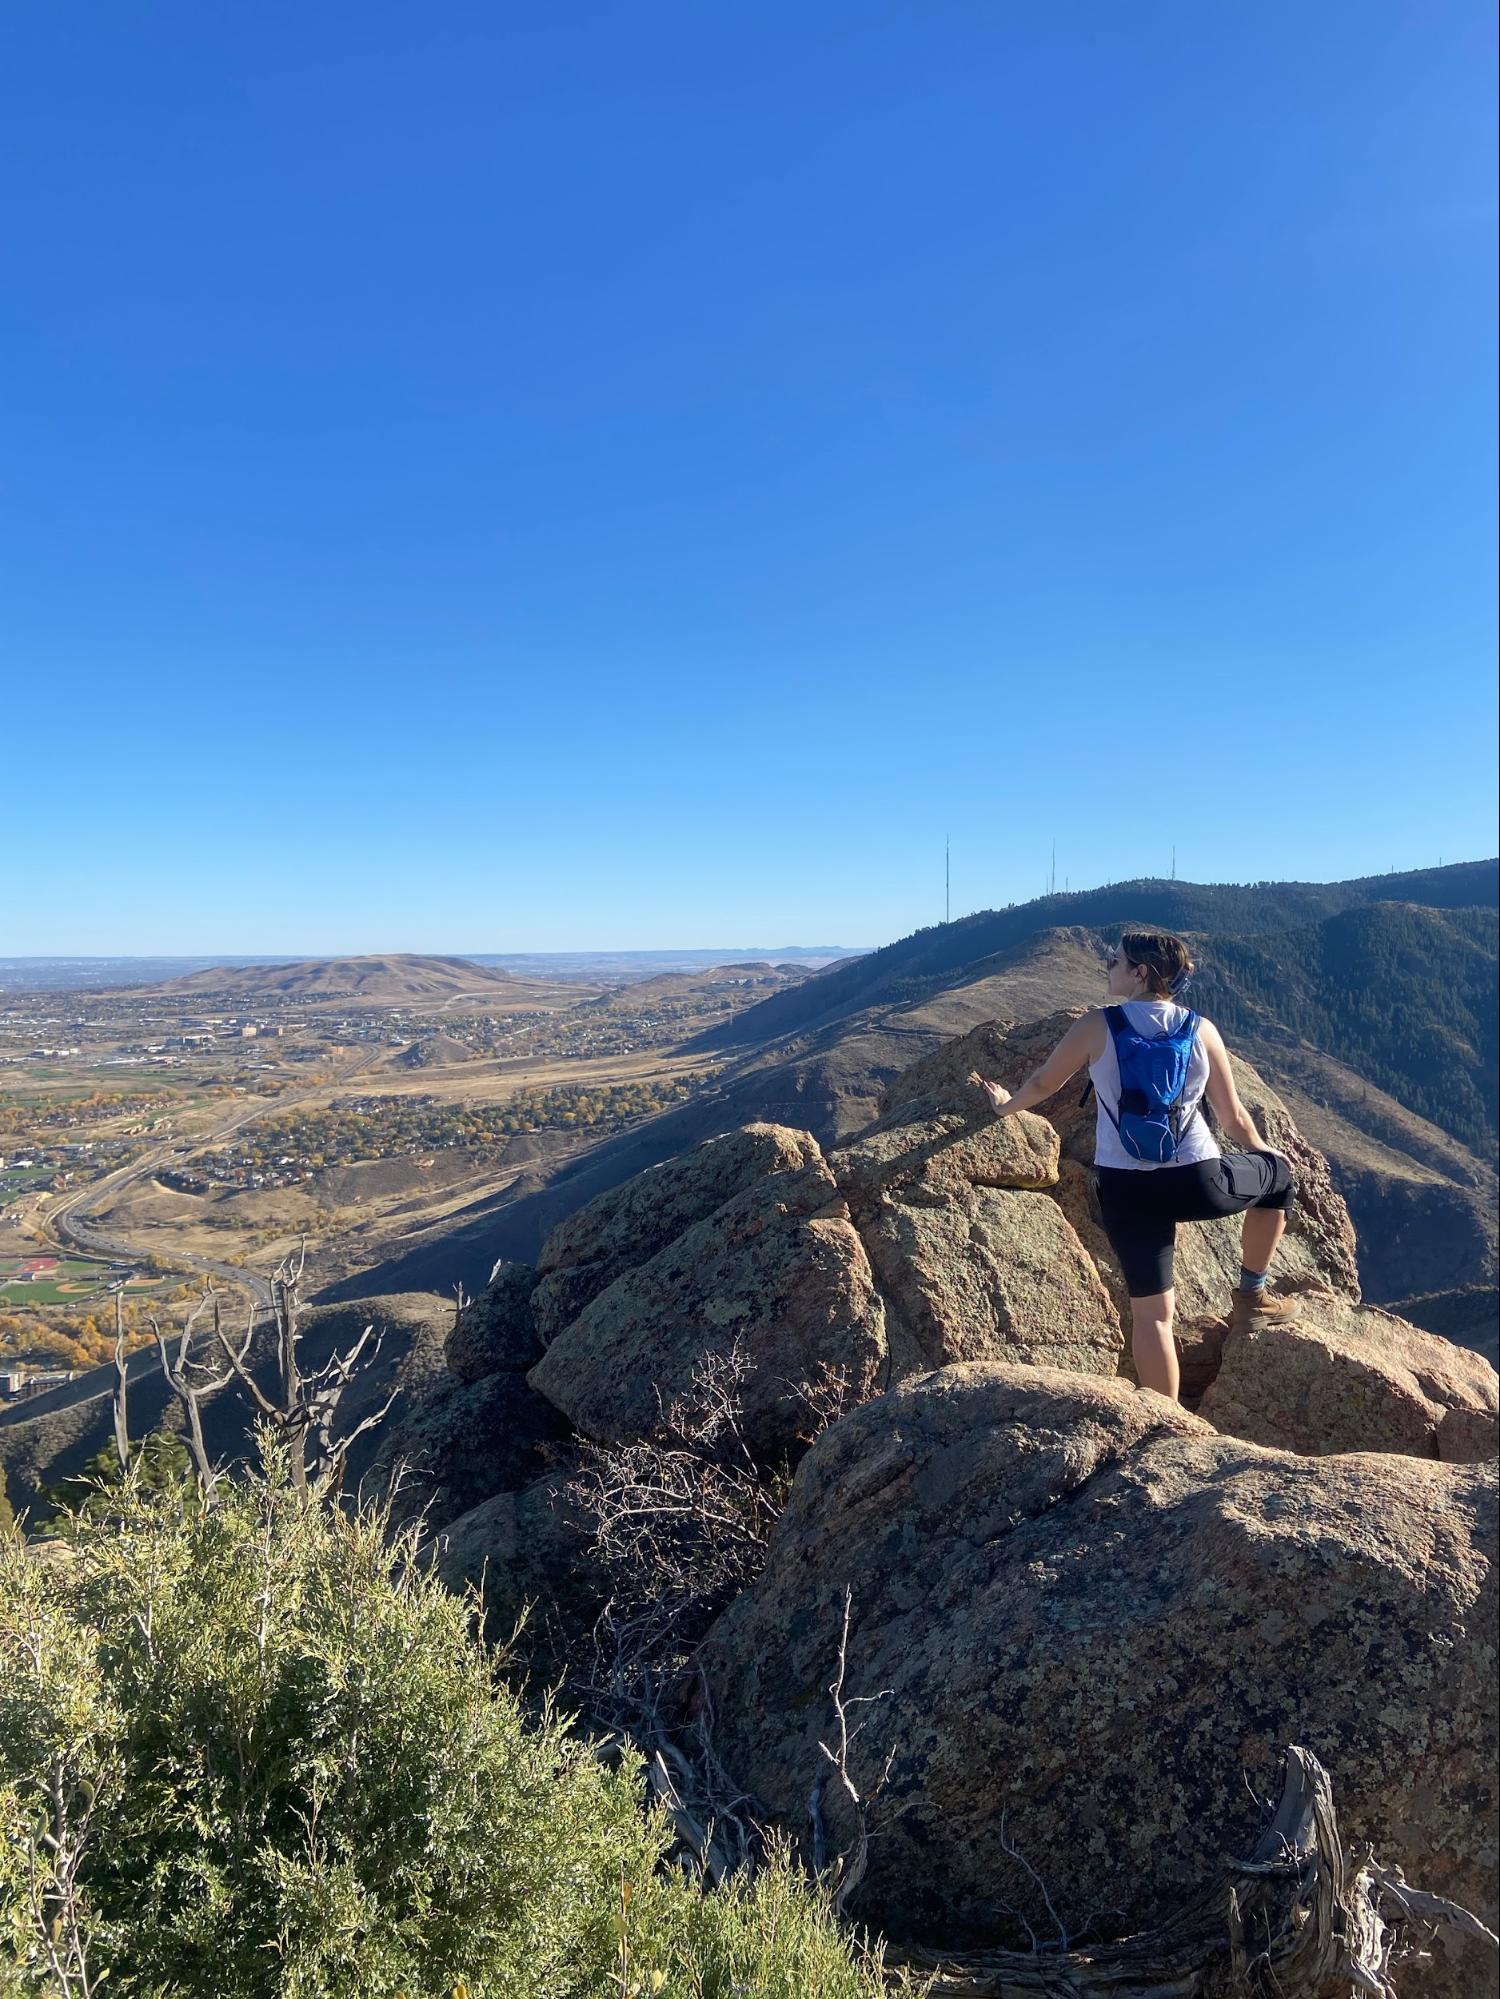 Tales of a Digital Nomad: How I Spent Three Months Living in Boulder, Colorado